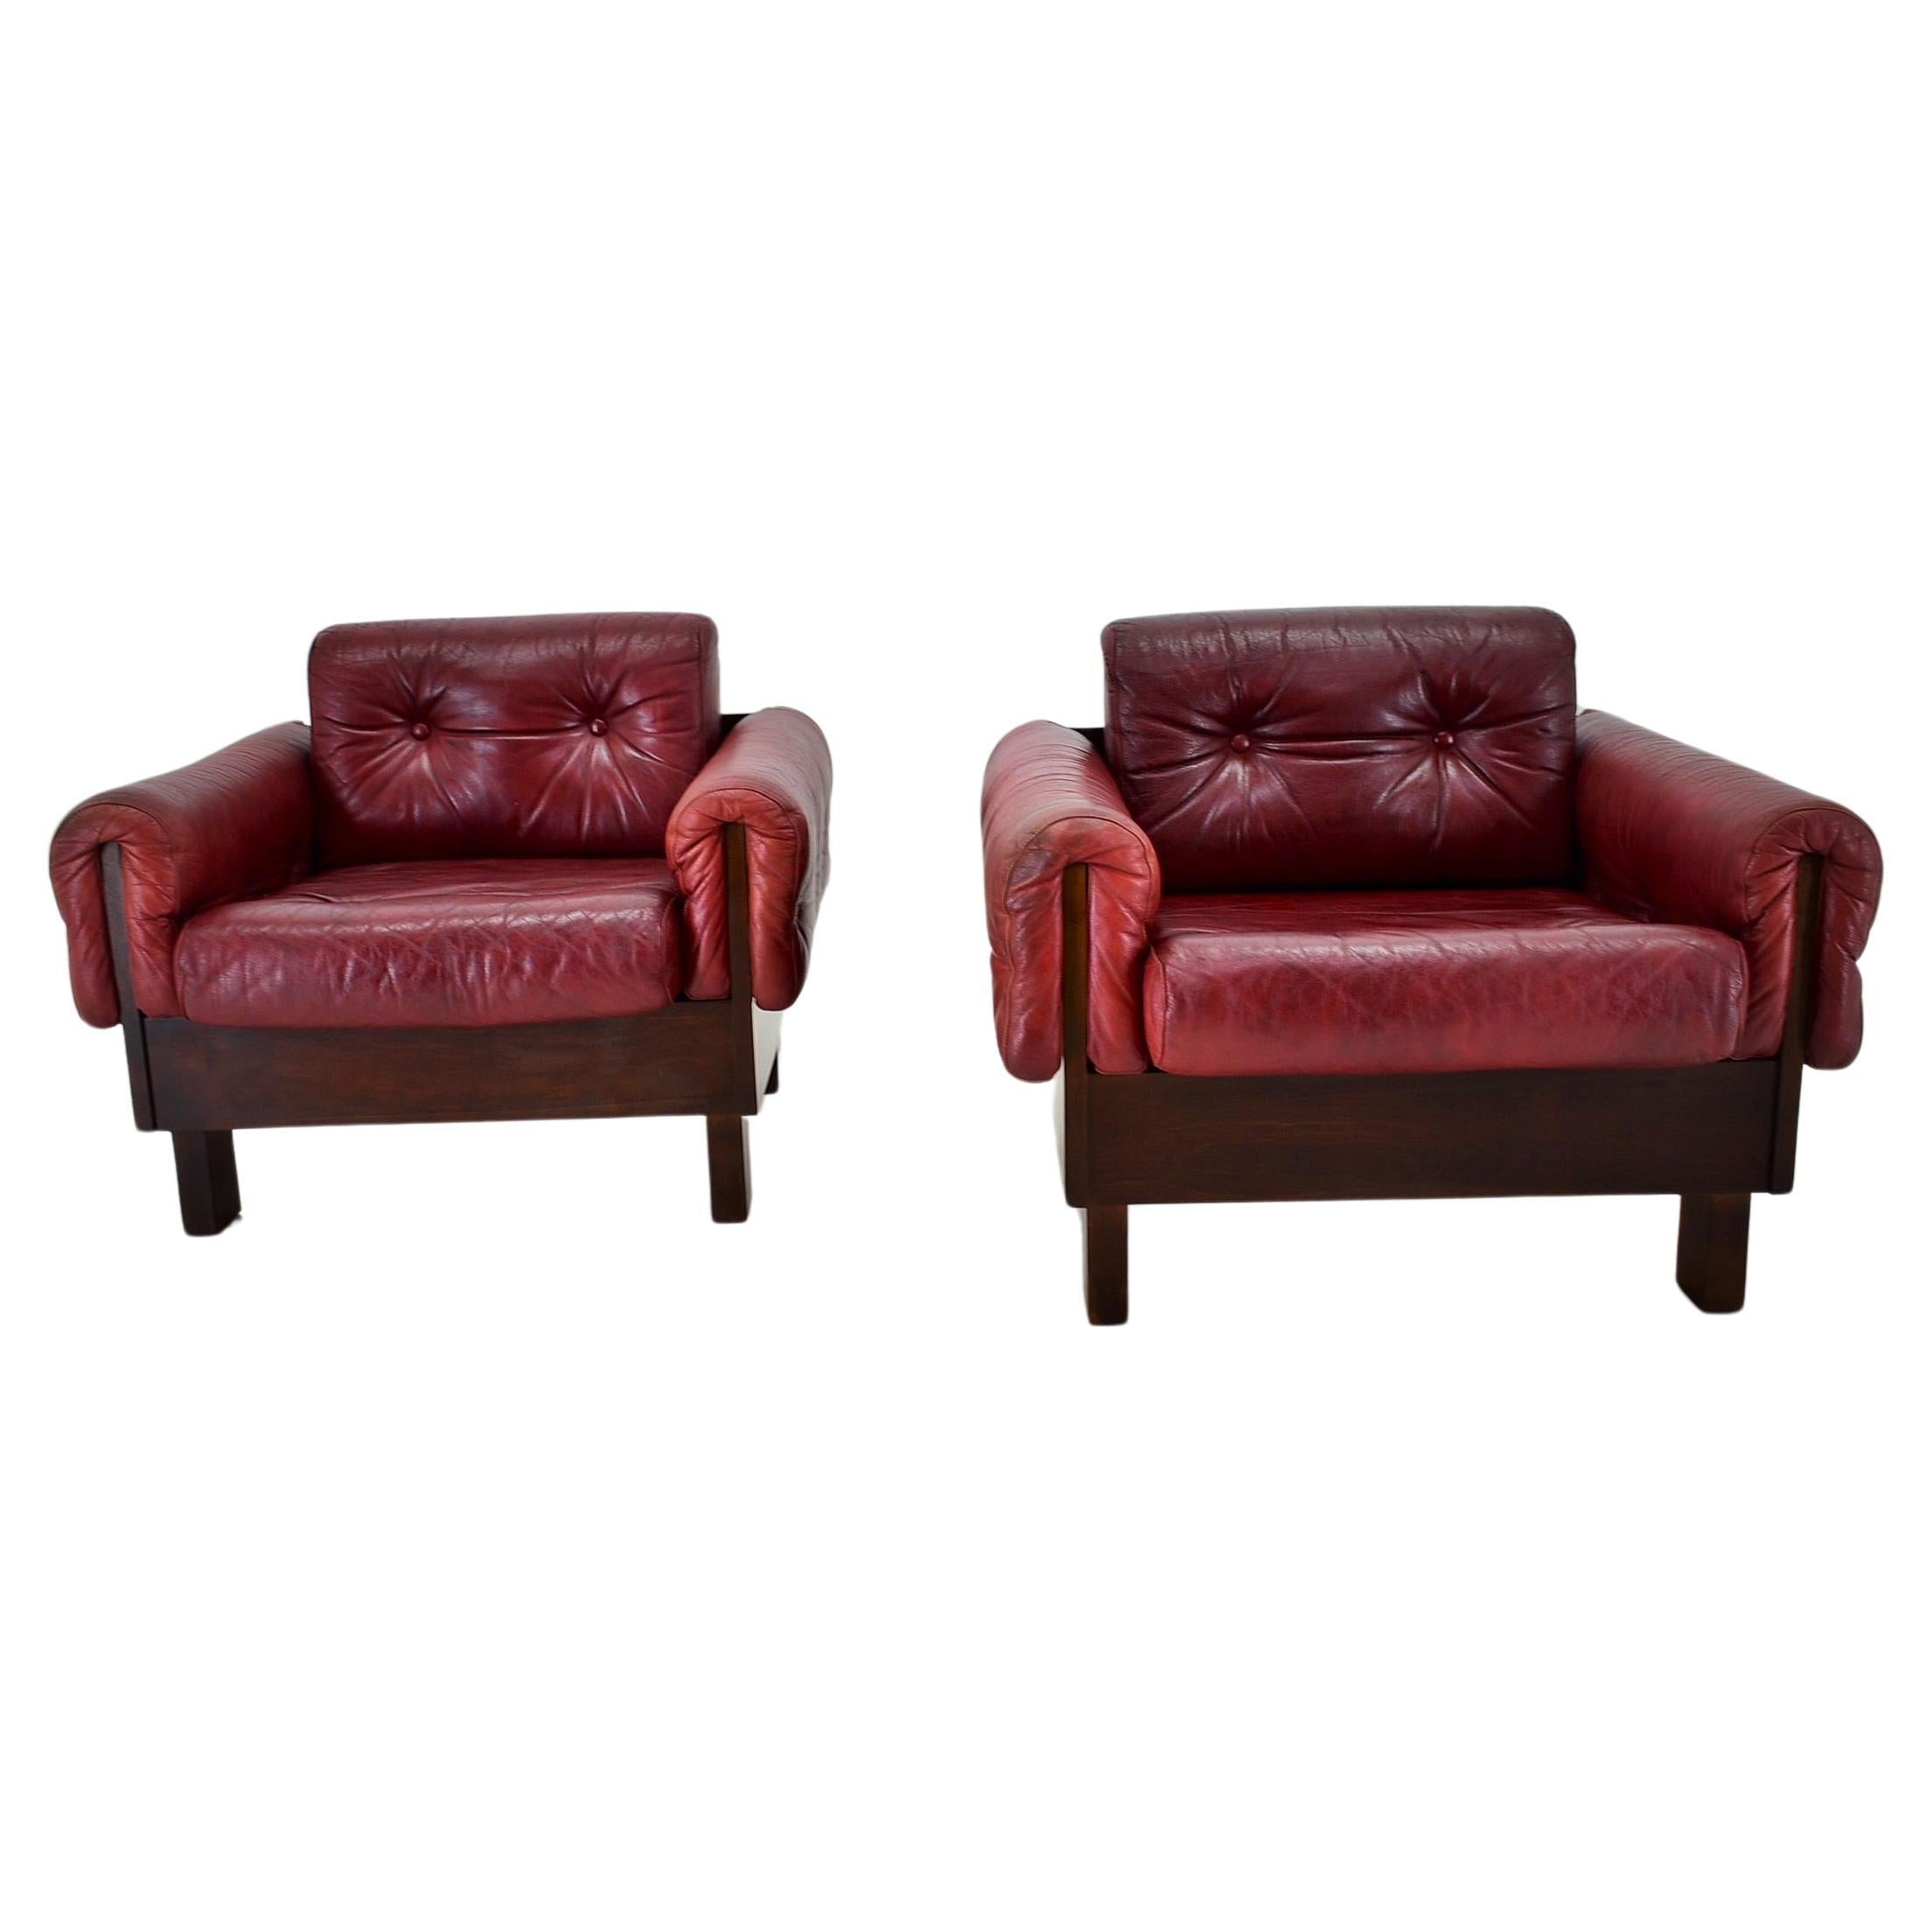 Pair of vintage leather armchairs , Czechoslovakia 1970s For Sale